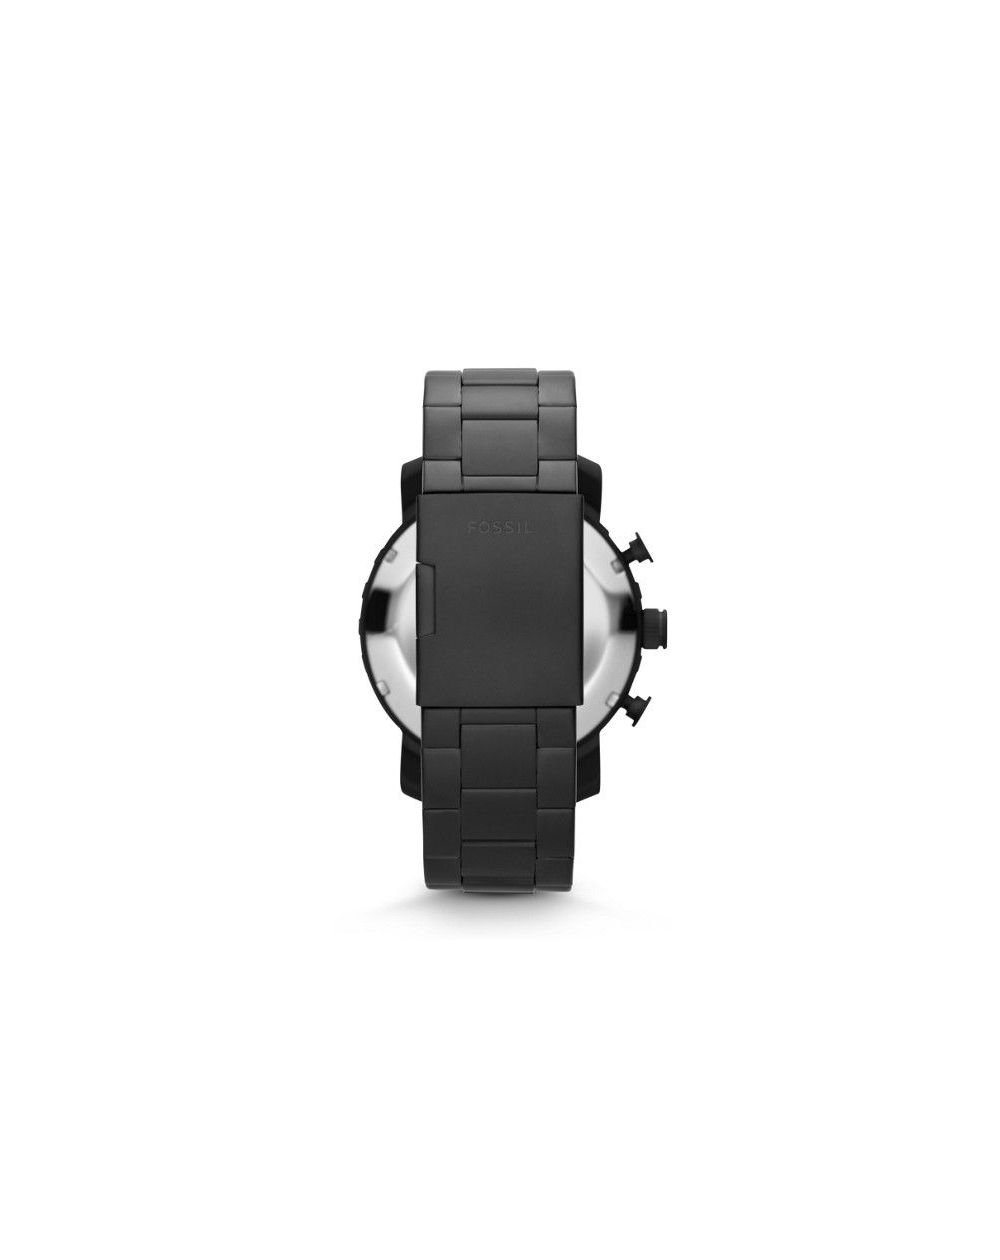 Fossil - Nate Stainless Steel Watch - Black